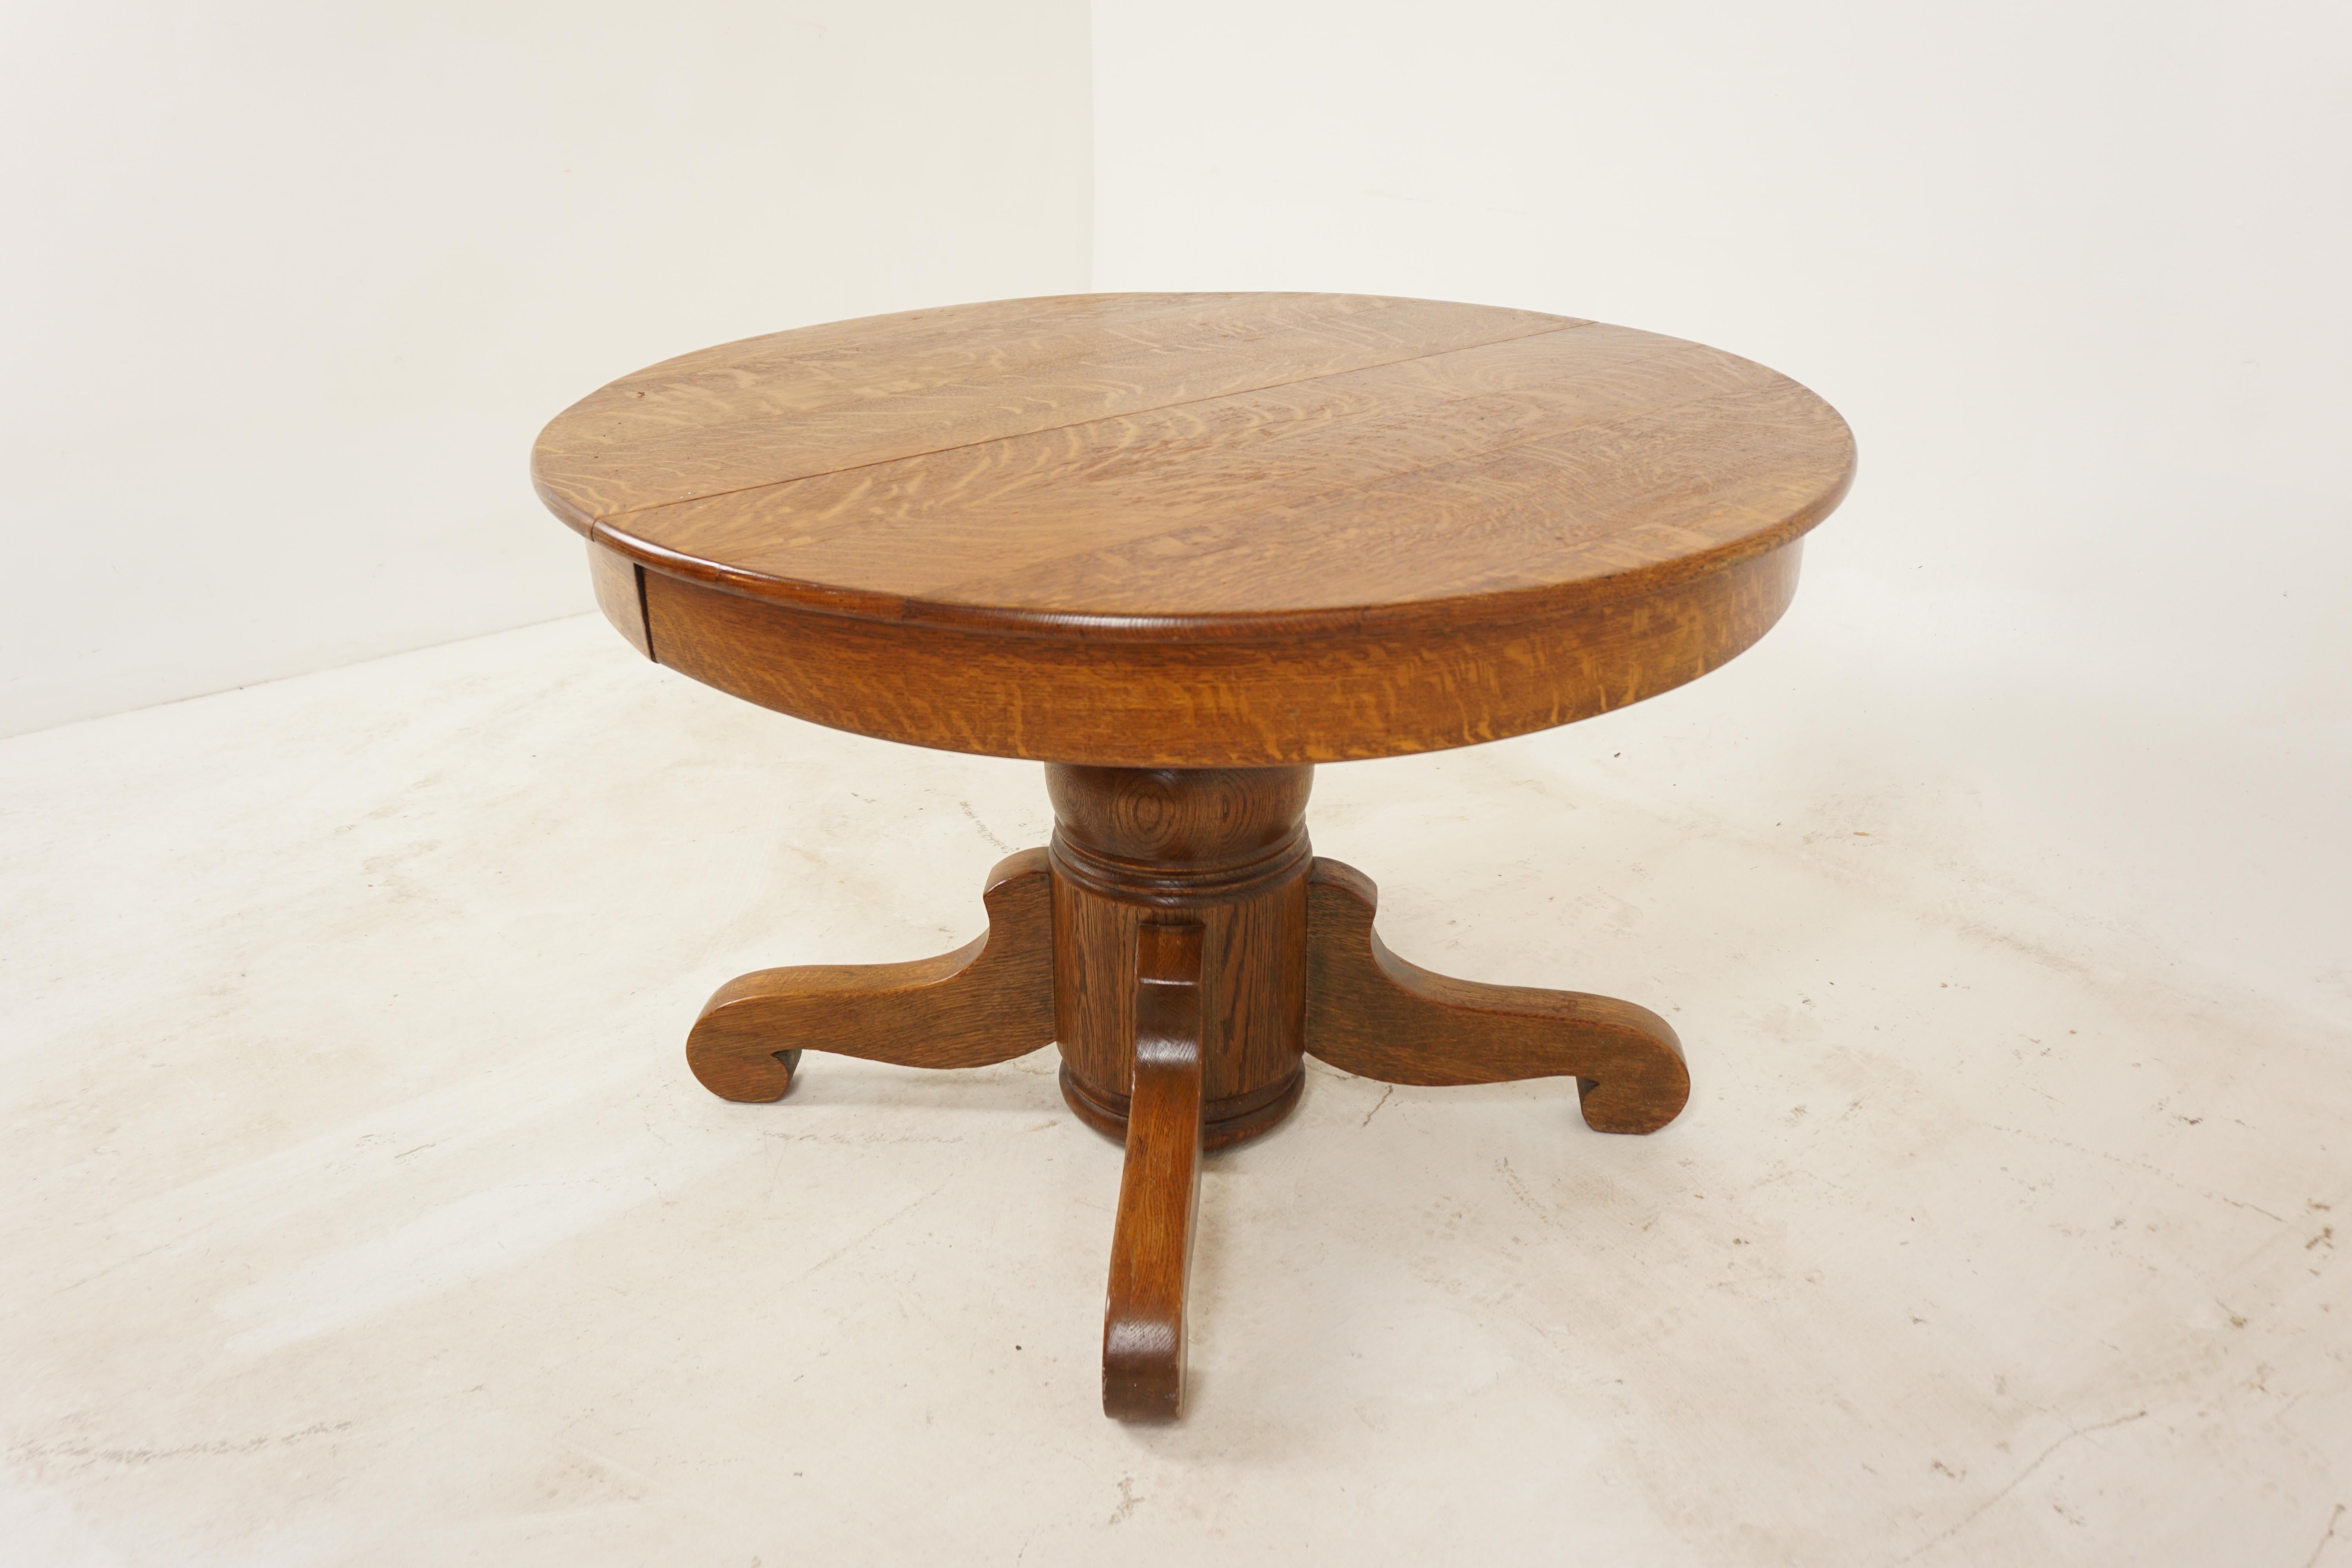 Antique tiger oak round table pedestal base, 2 leaves, America 1910, B2873

America 1910
Solid oak
Original finish
Round tiger oak top
Four legged pedestal base 
Two leaves
All in very good condition

B2873

Measures: 44